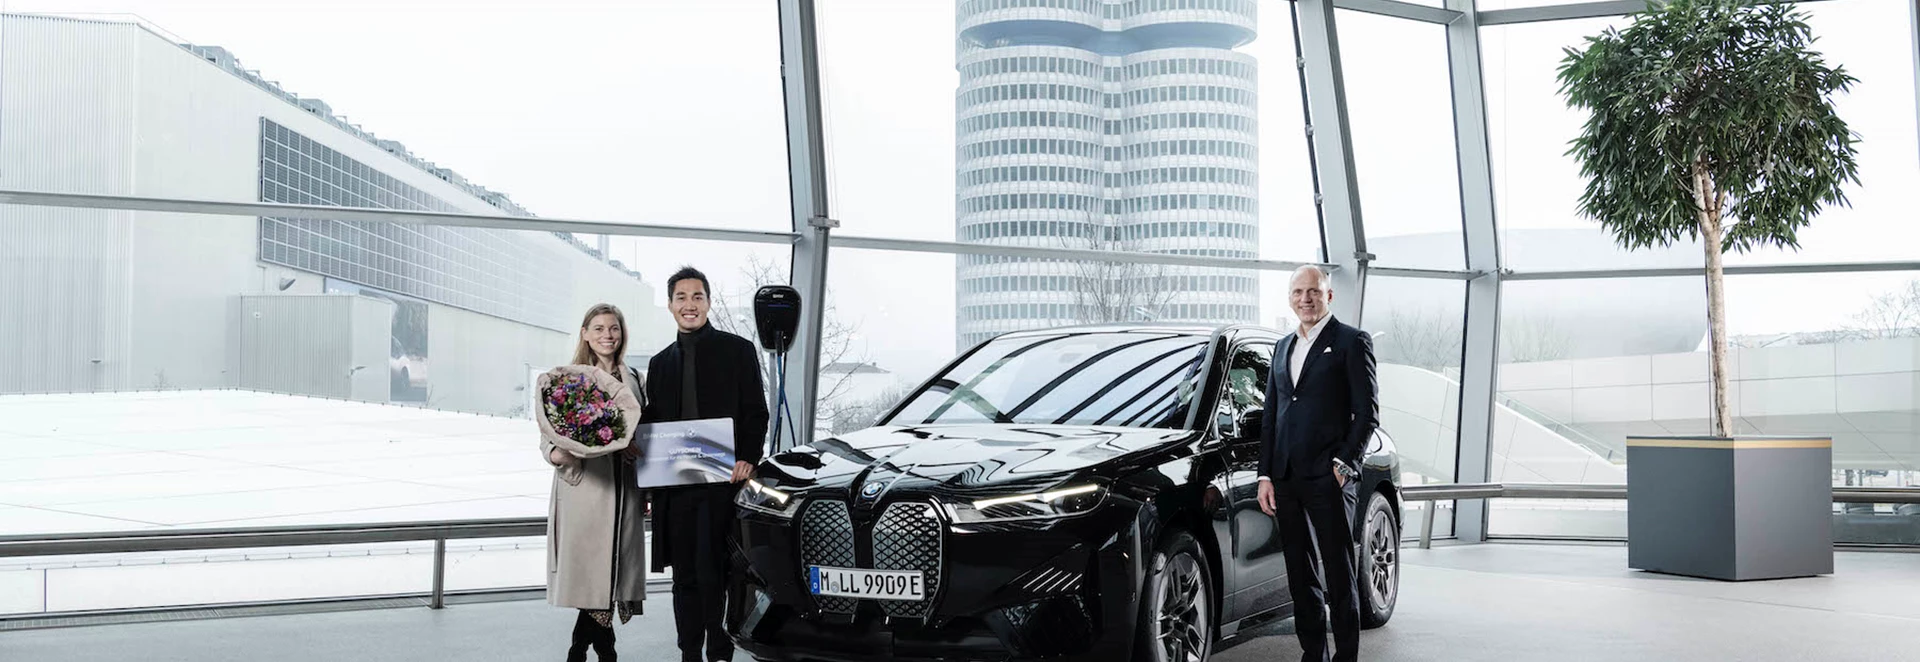 BMW Group hands over one millionth electrified vehicle 